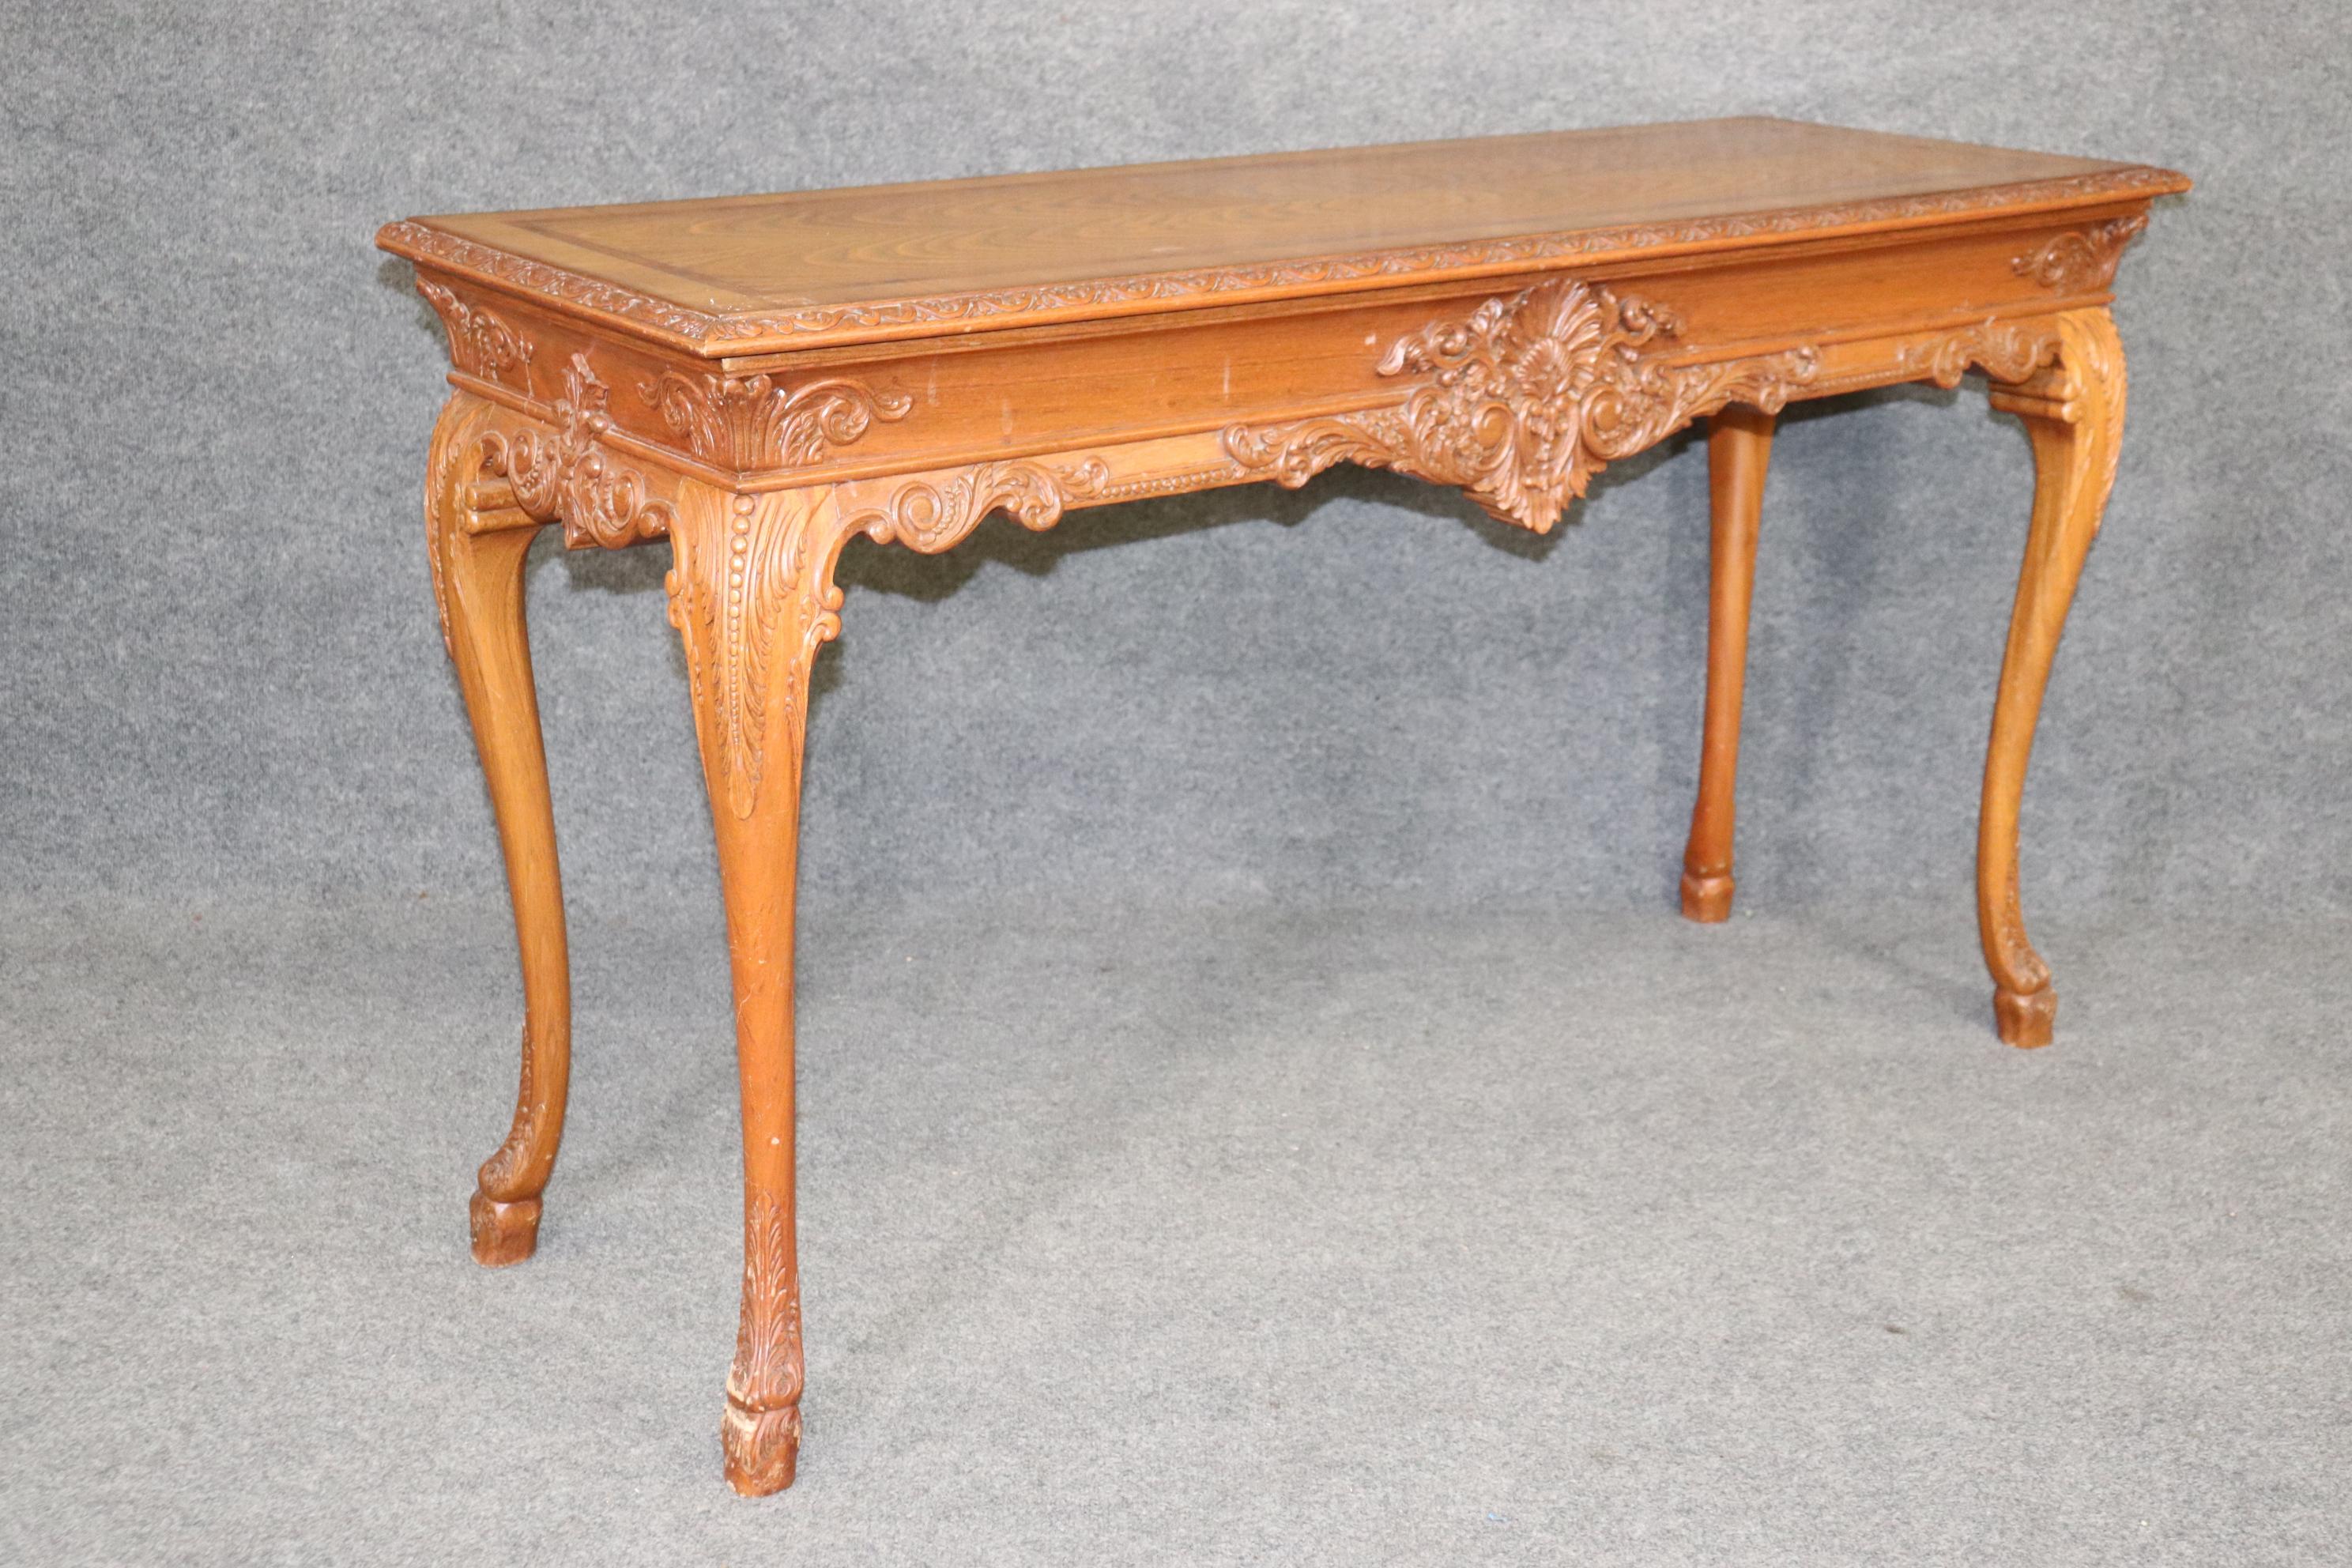 This is a beautiful European, probably English, extremely detailed and beautifully carved walnut Georgian table. The table can be used as a server or a console table. The carving and inlay is extremely well done and the condition is also good with